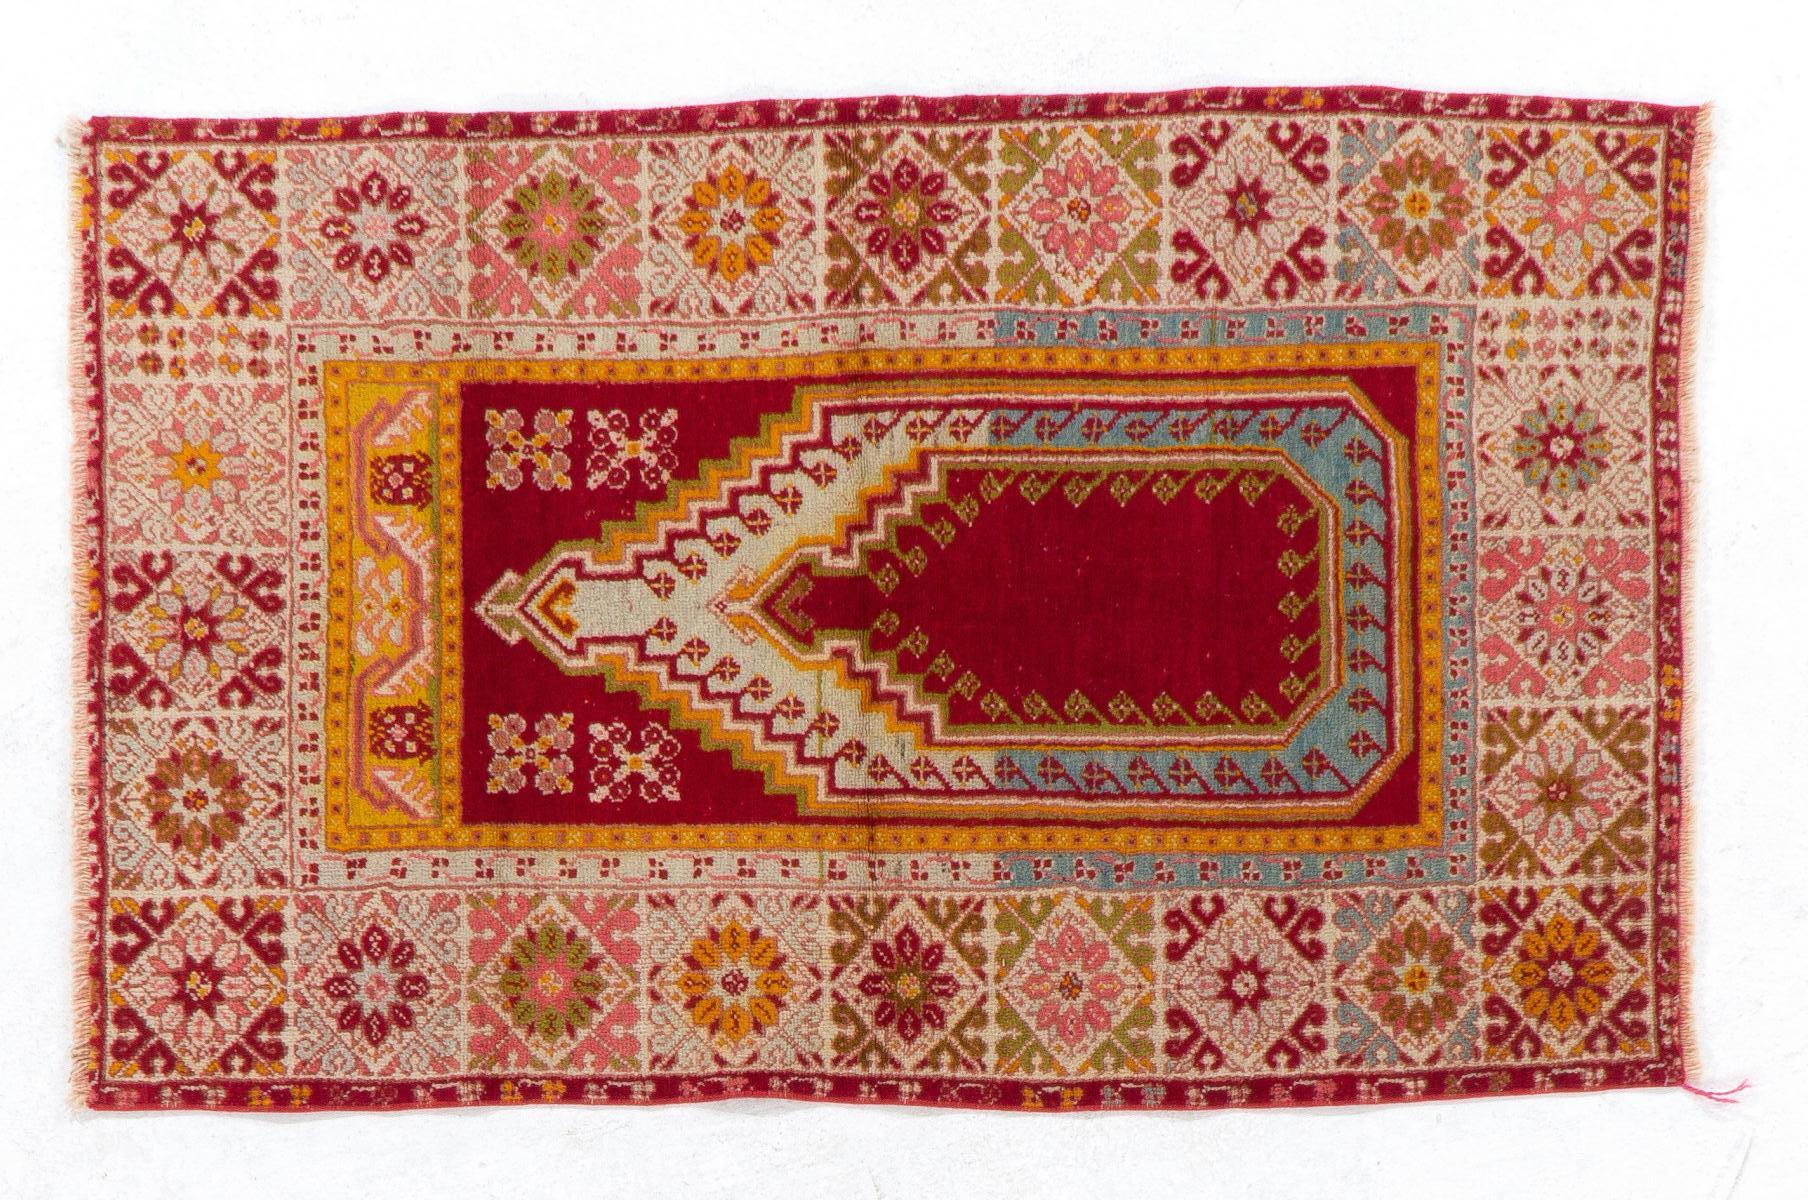 3.3x5.3 Ft Semi Antique Turkish Kirsheir Prayer Rug, circa 1940 In Good Condition For Sale In Philadelphia, PA